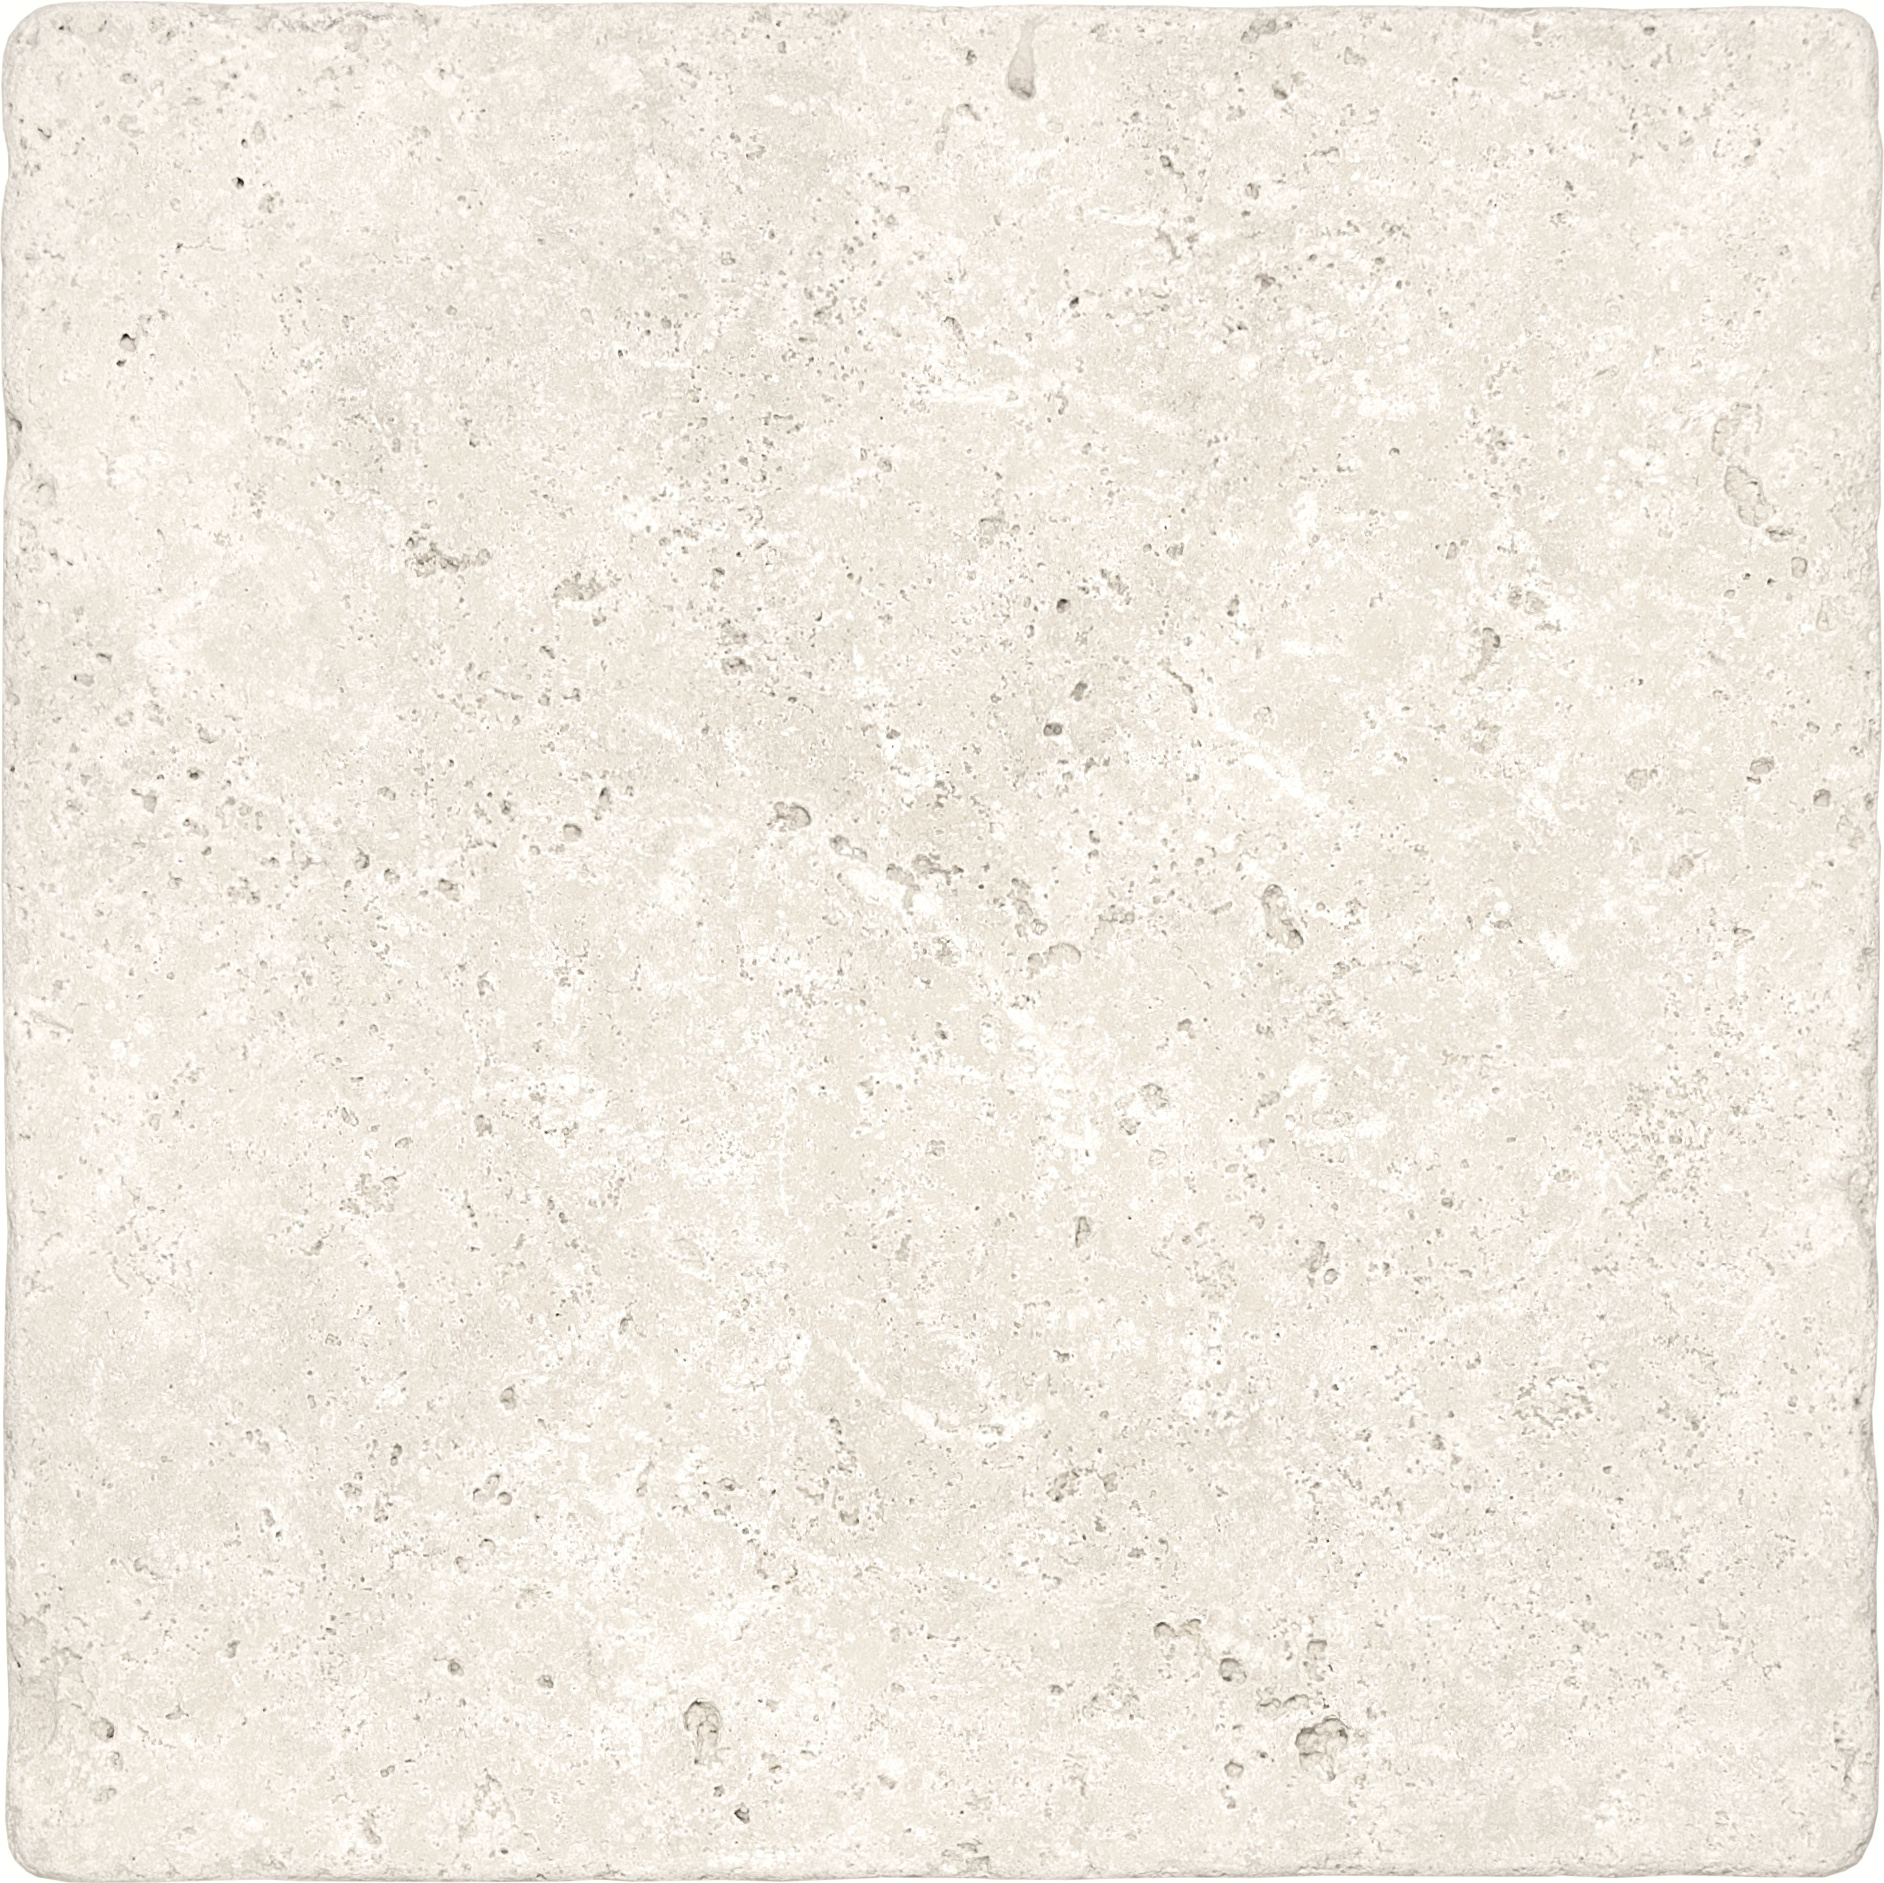 travertine pattern natural stone field tile from ivory anatolia collection distributed by surface group international tumbled finish tumbled edge 12x12 square shape